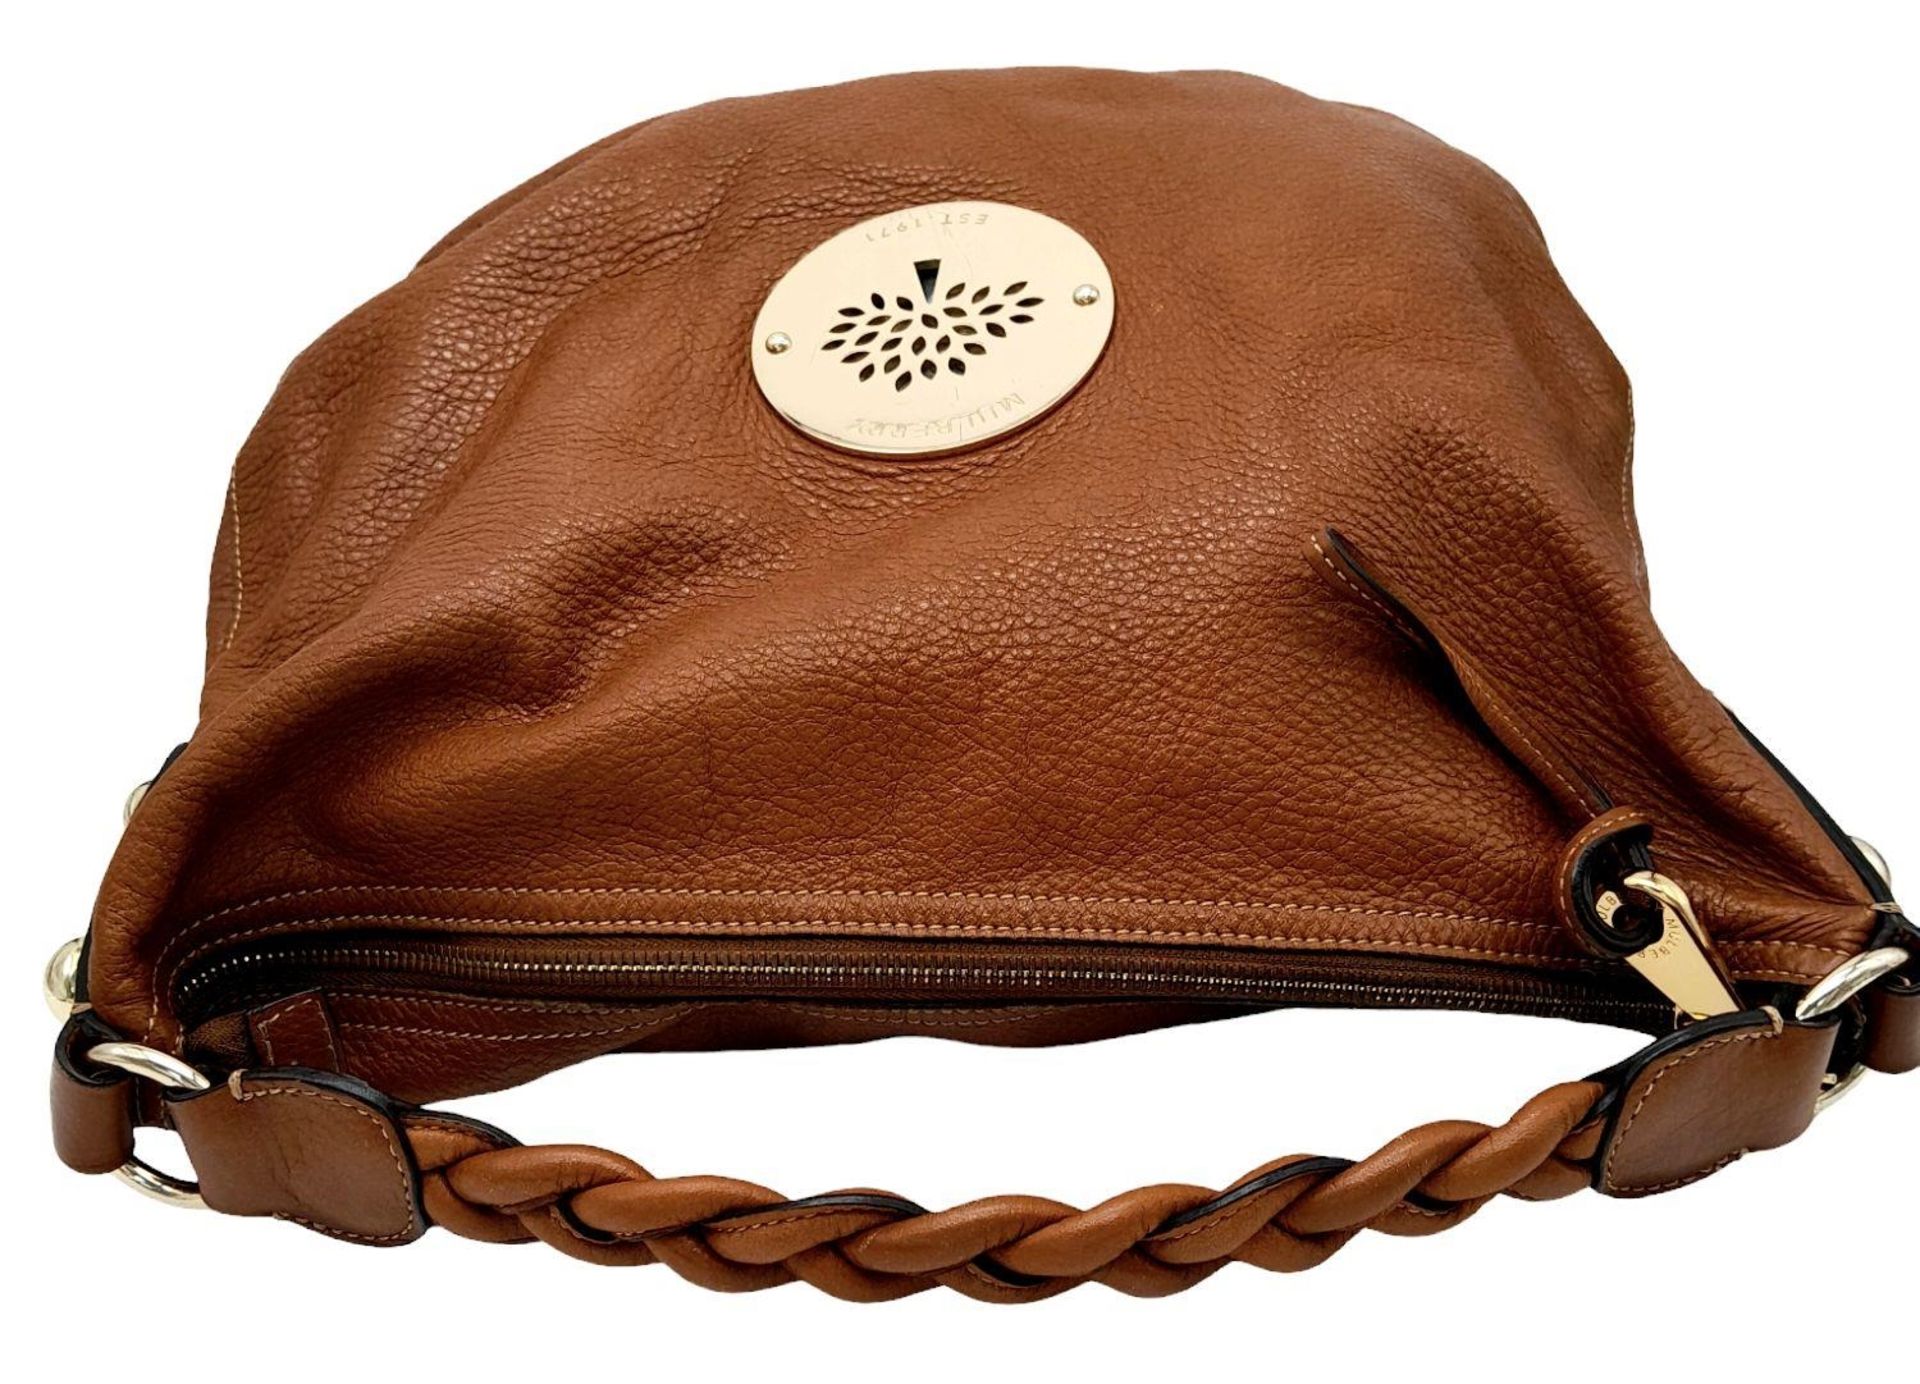 A Mulberry Tan Daria Hobo Bag. Leather exterior with gold-toned hardware, braided strap and zip - Bild 3 aus 8